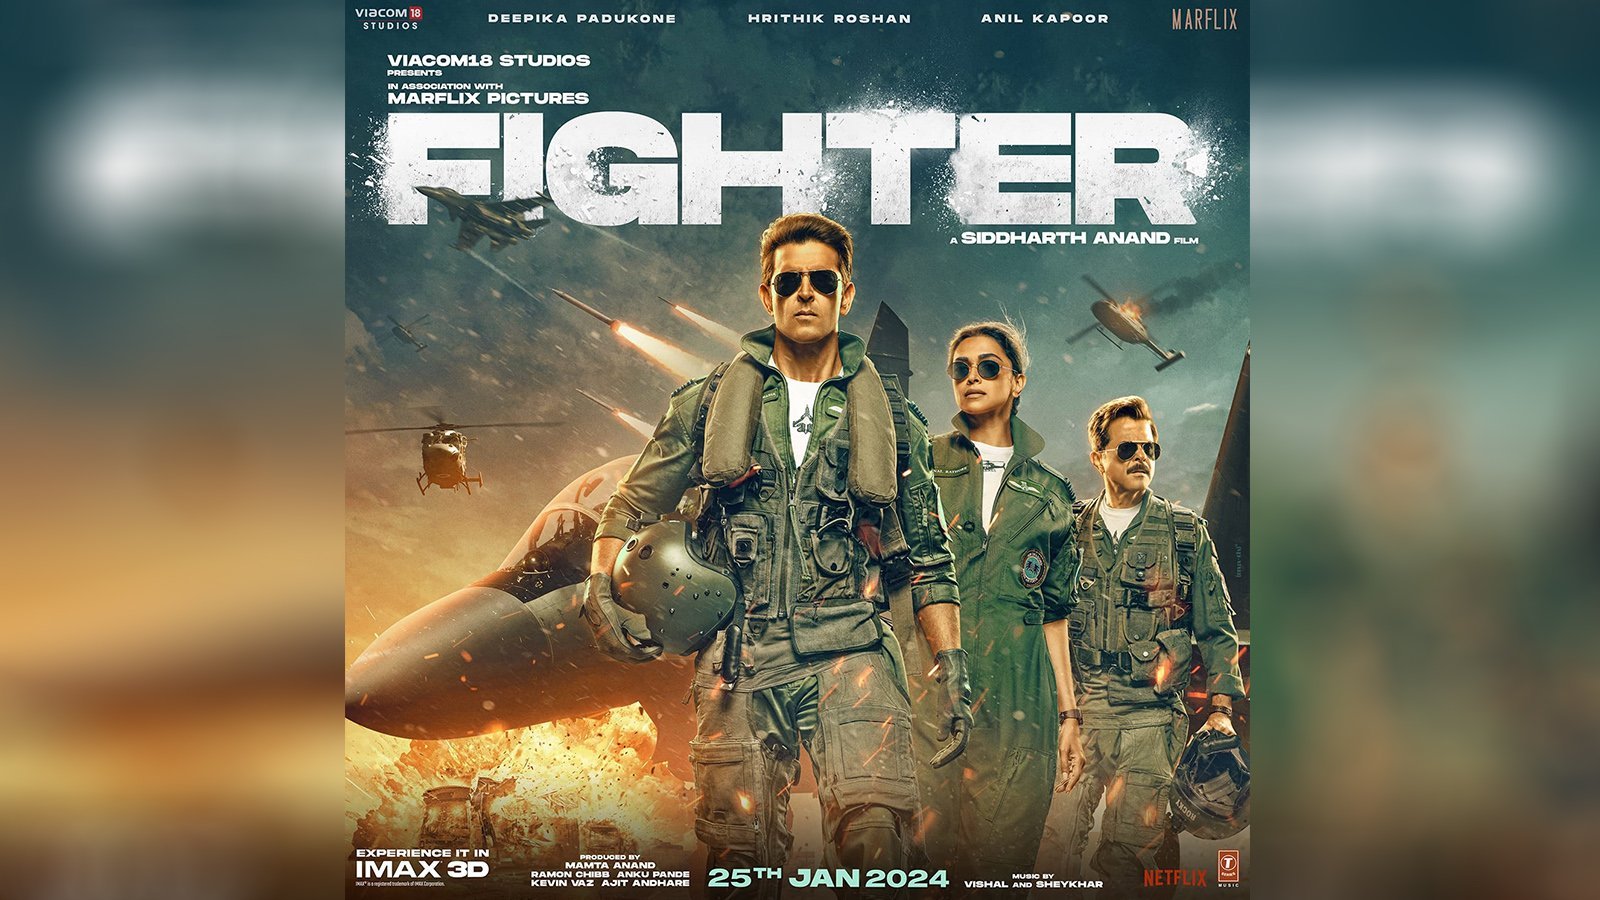 Siddharth Anand's 'Fighter' Promises an Adrenaline-Fueled Journey - Release Date Locked for January 25